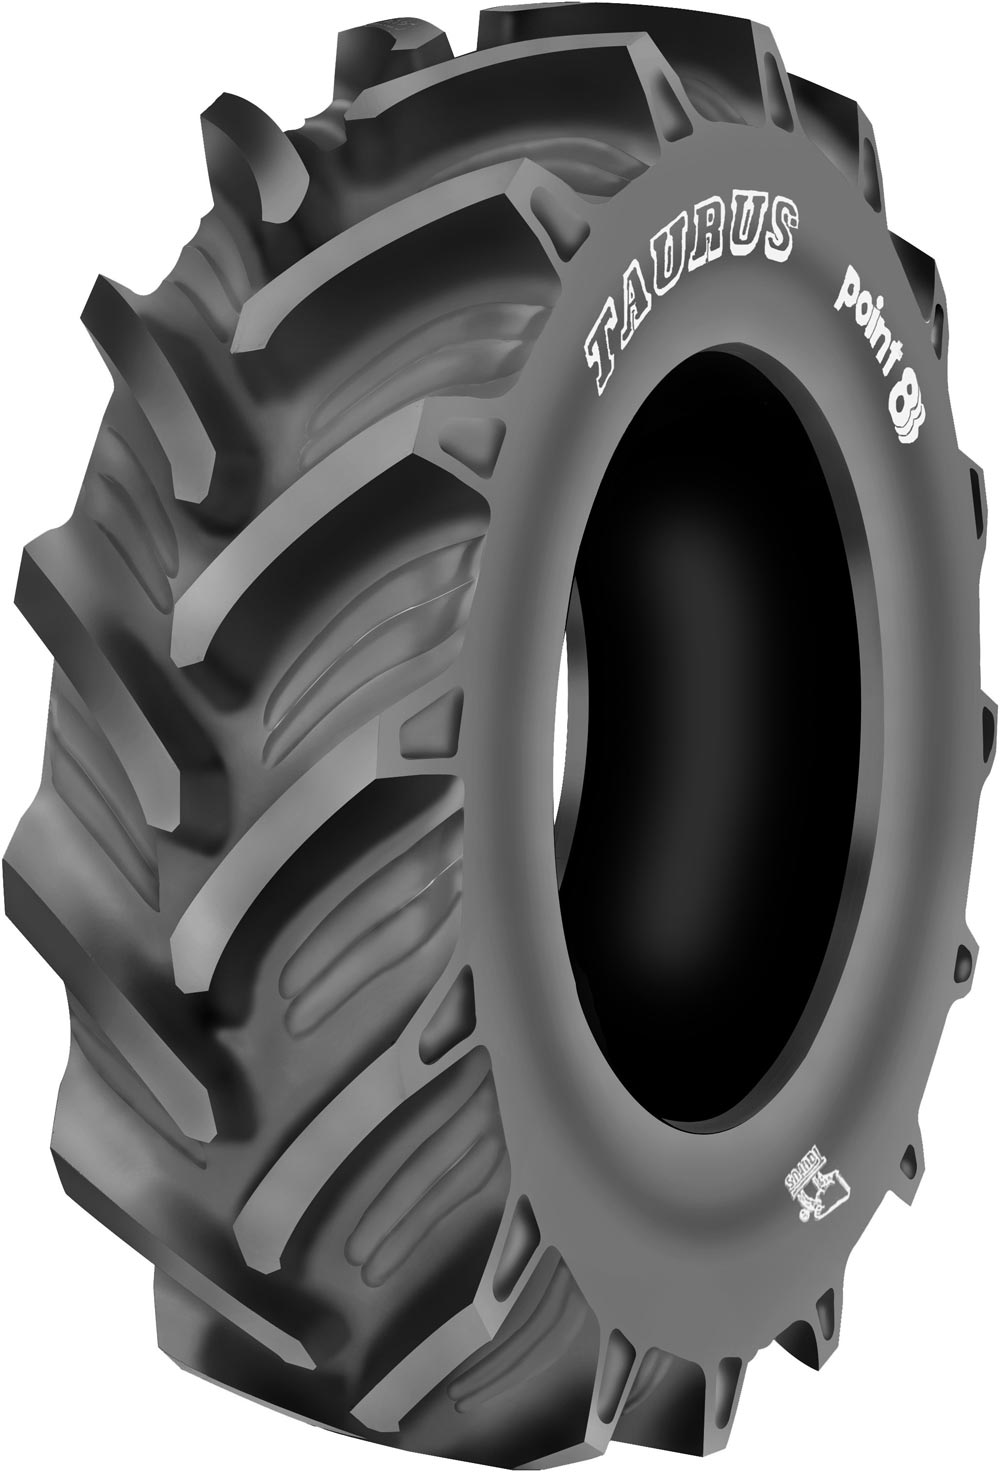 product_type-industrial_tires TAURUS POINT 8 18.4 R38 460R